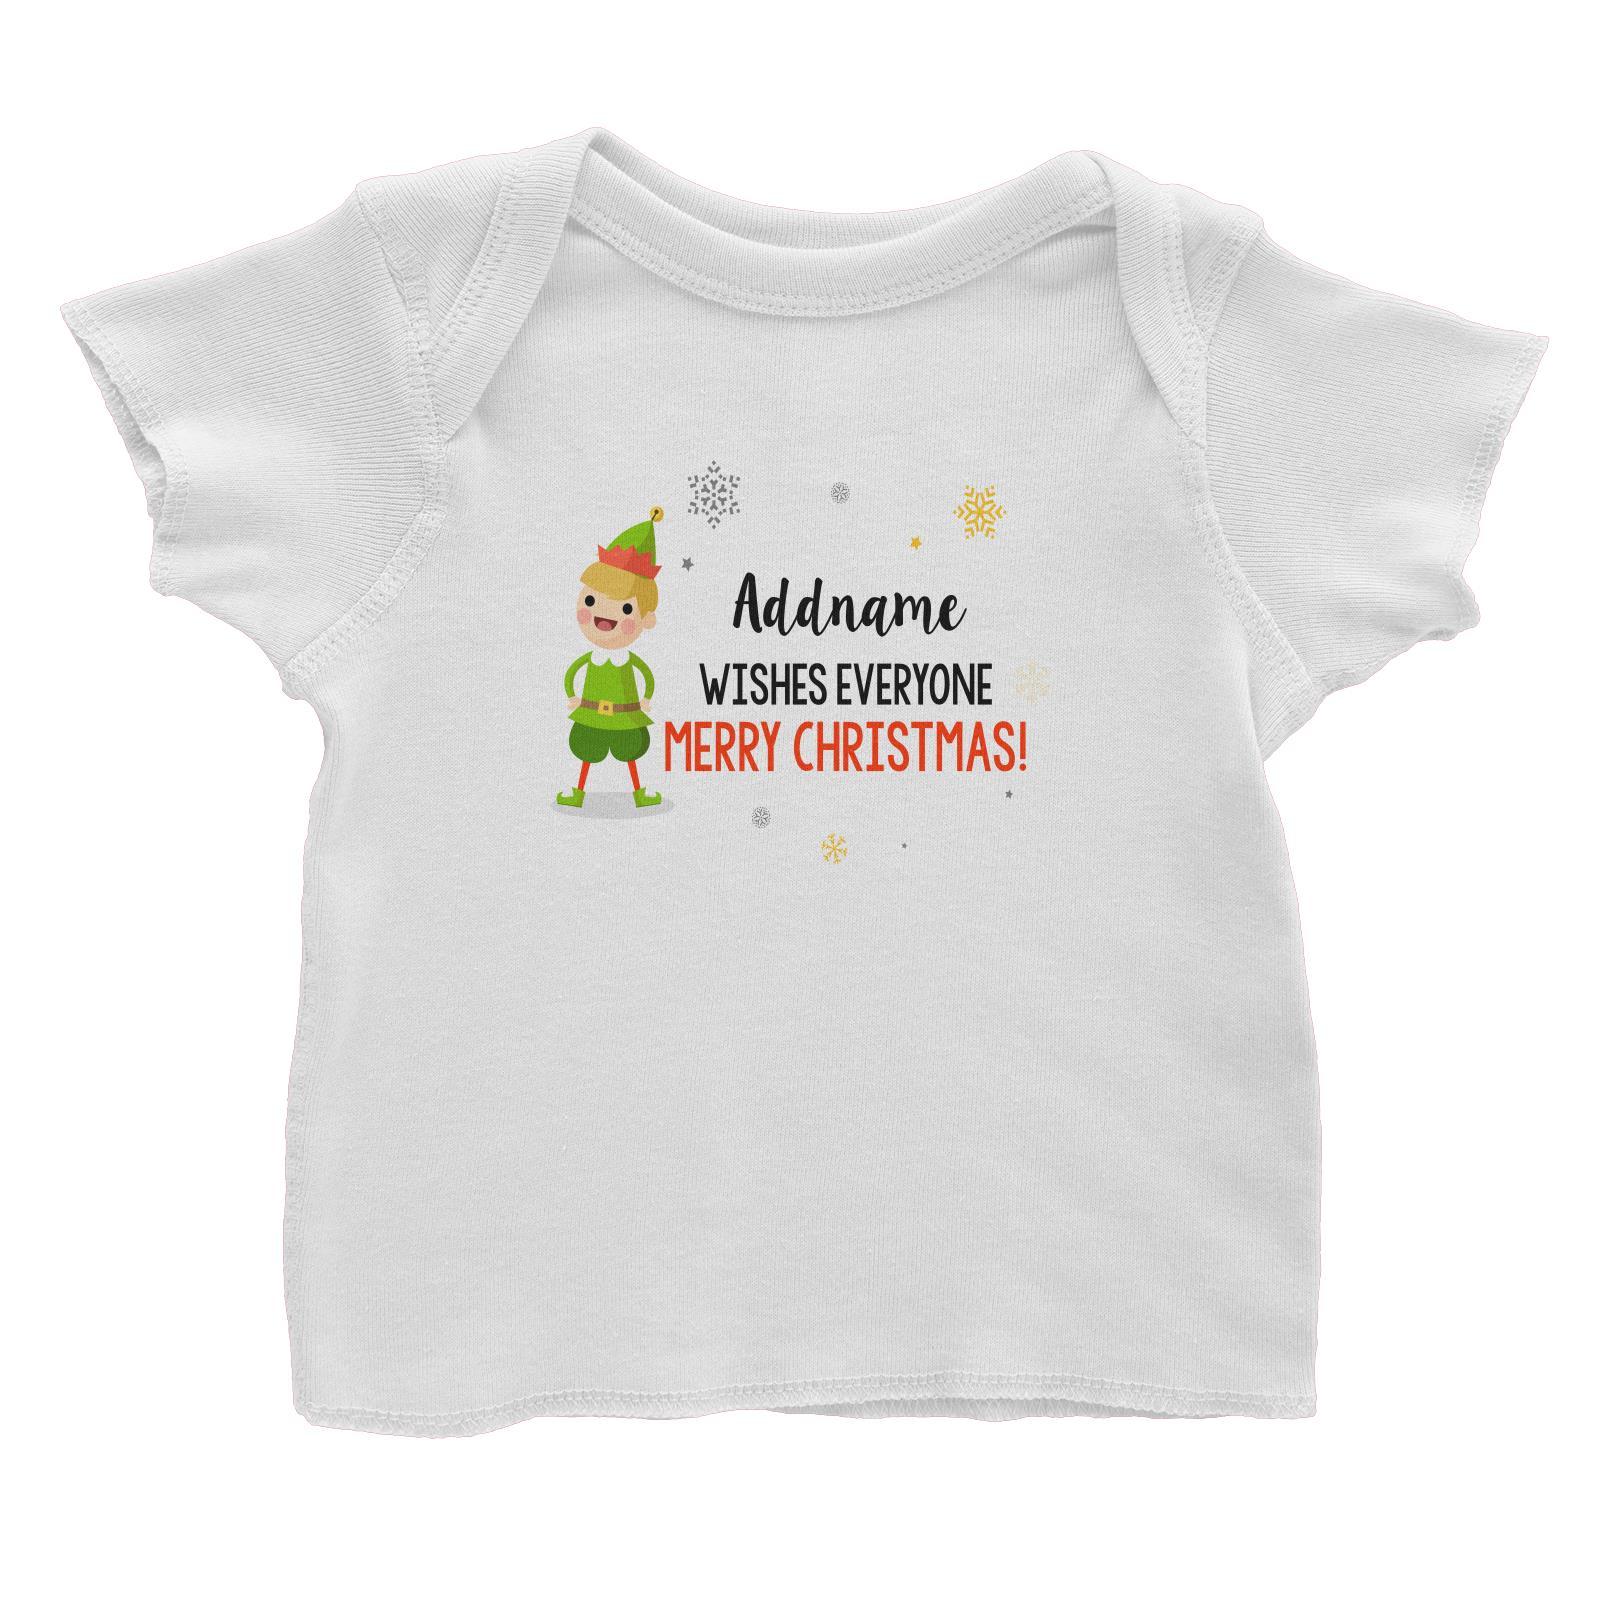 Cute Elf Boy Wishes Everyone Merry Christmas Addname Baby T-Shirt  Matching Family Personalizable Designs